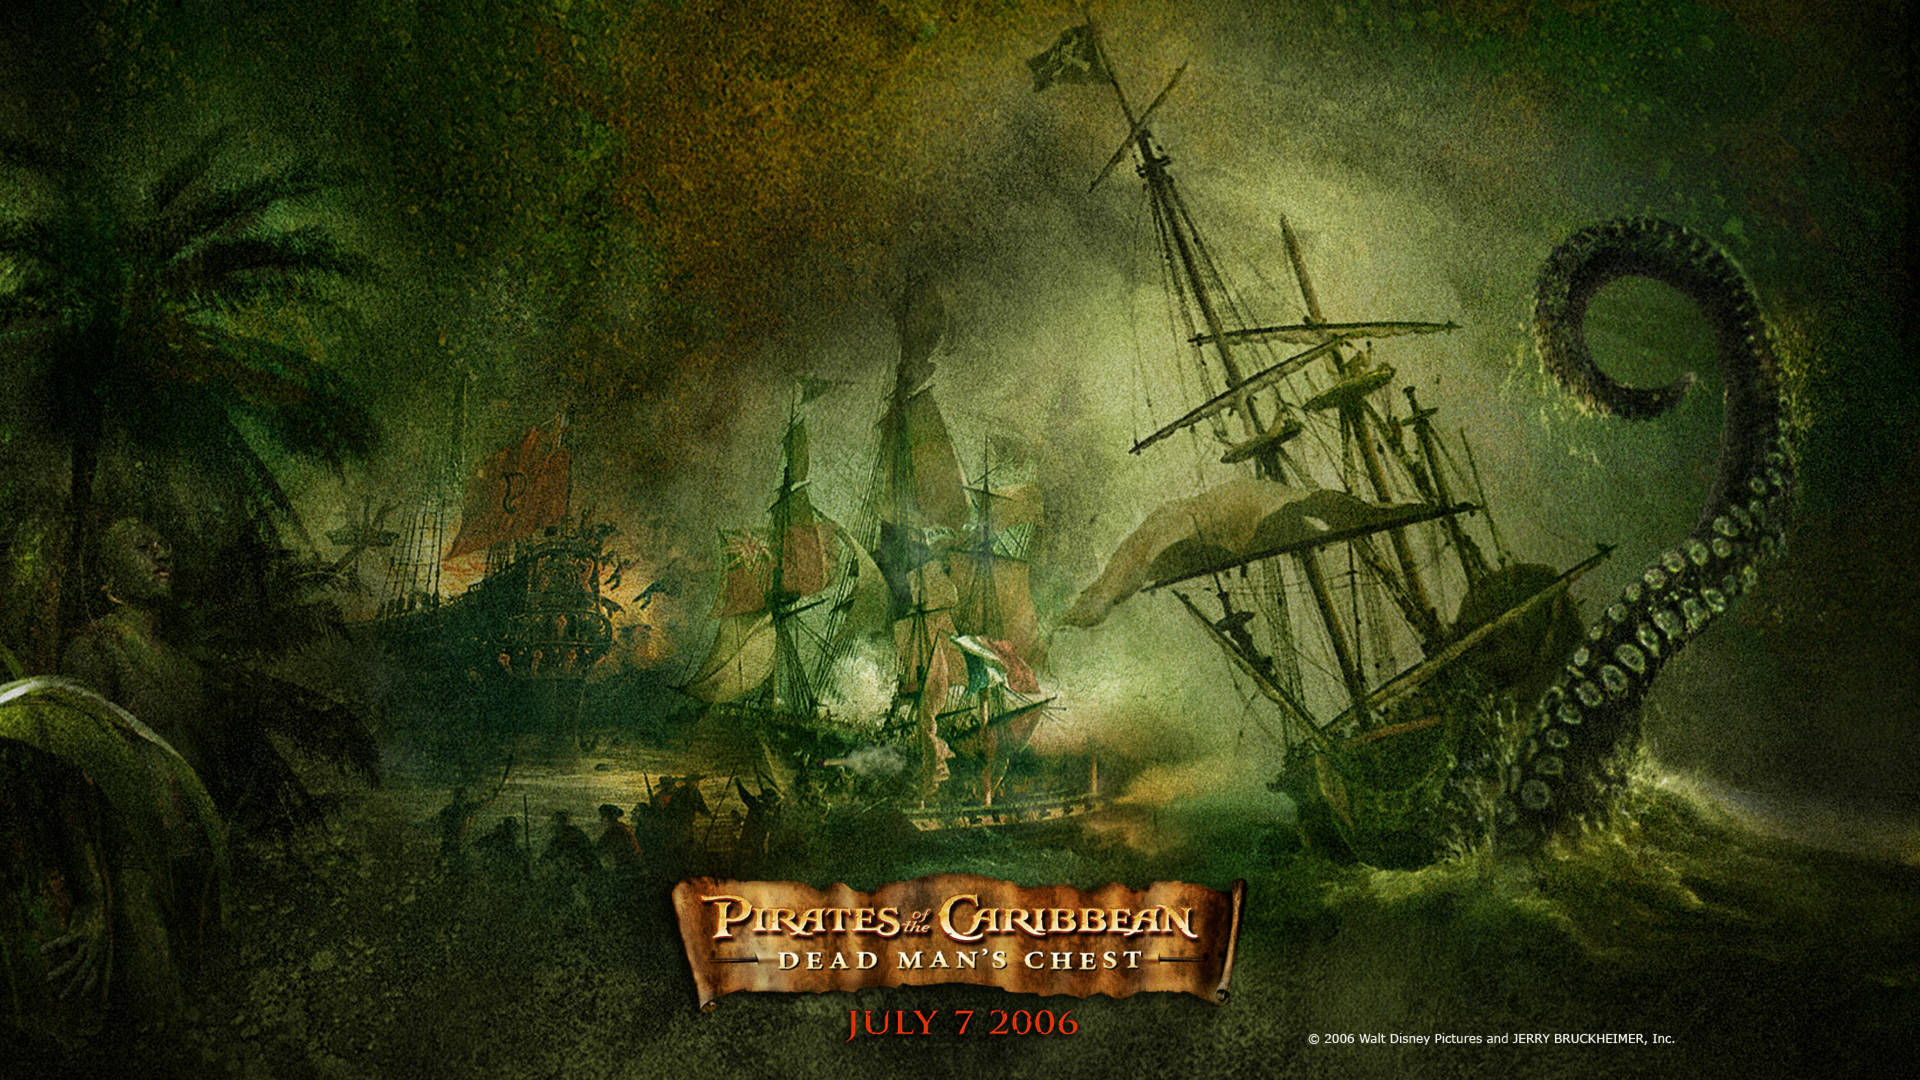 Pirates Of The Caribbean: Dead Man's Chest Poster Wallpaper